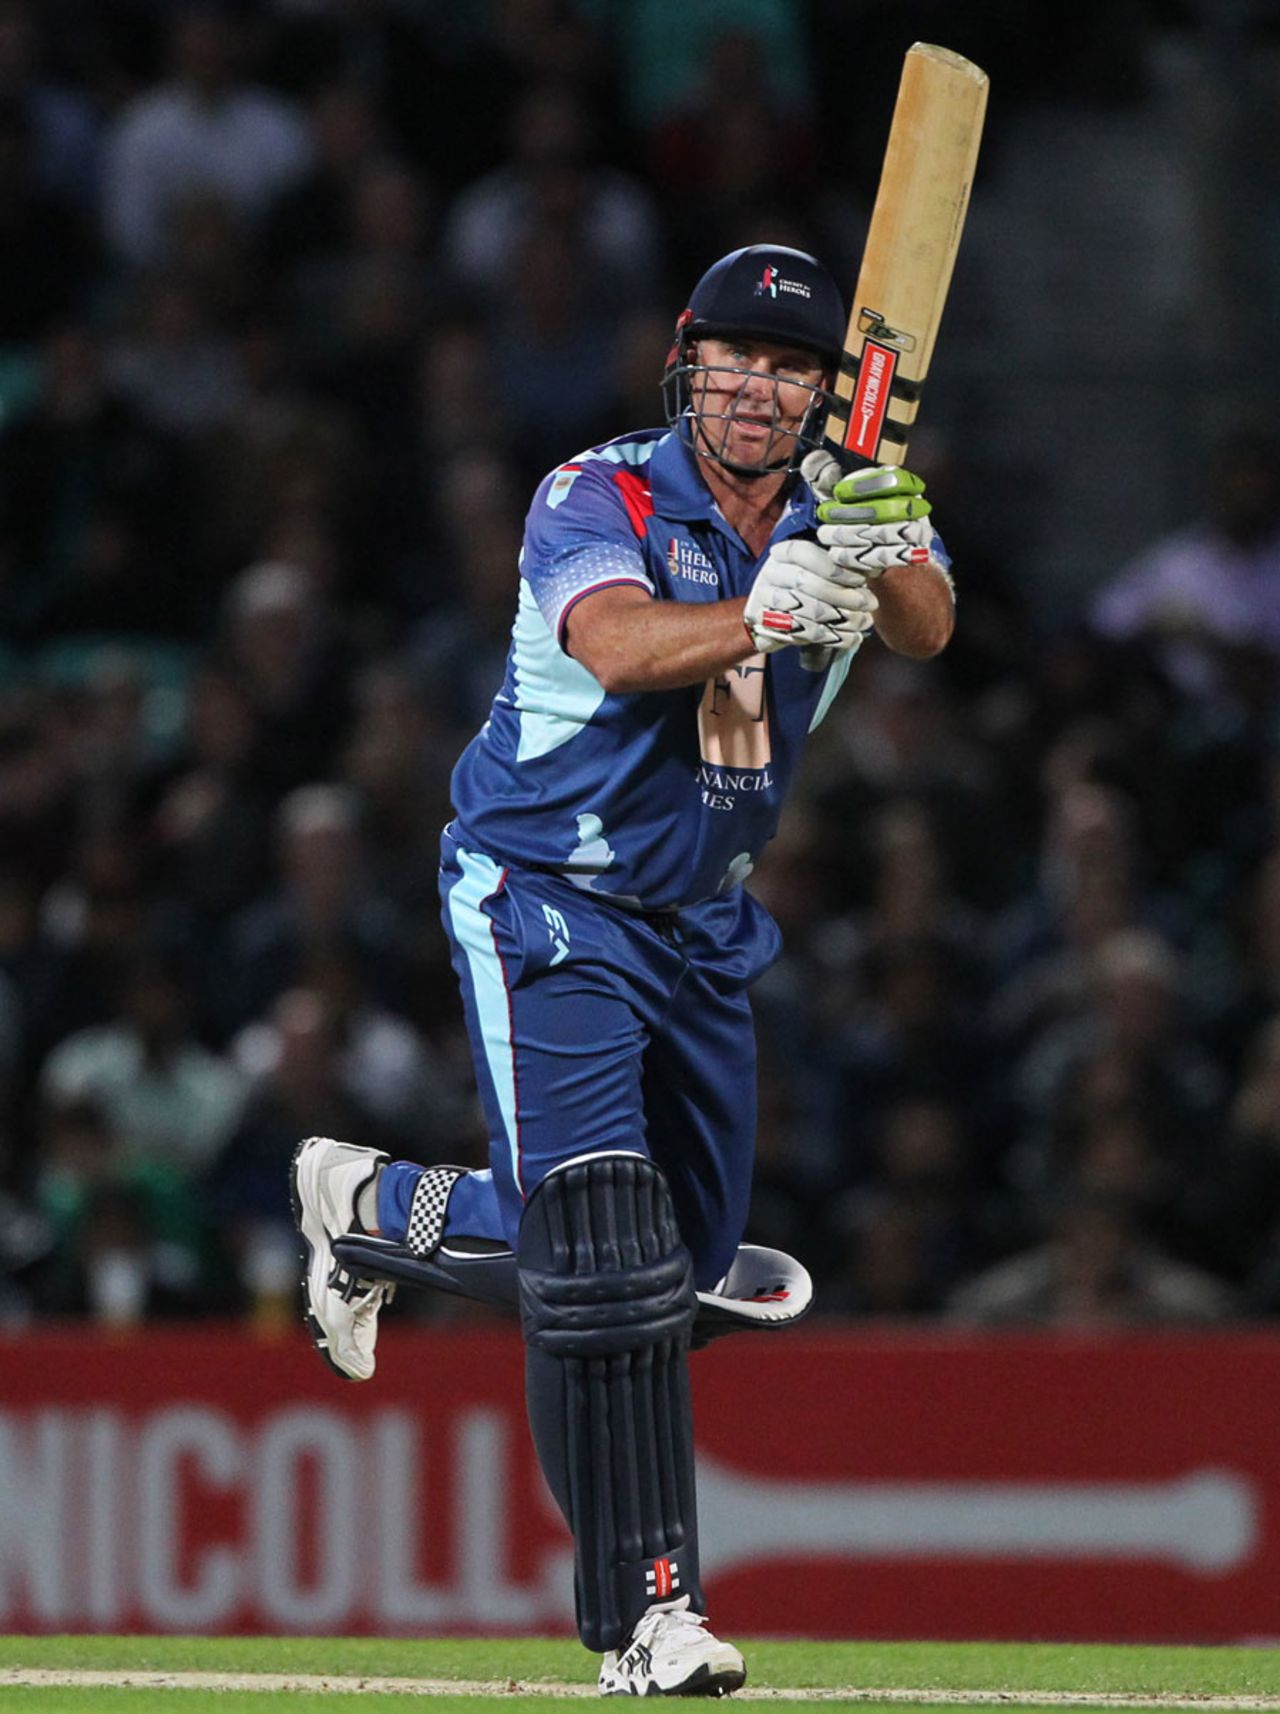 Matthew Hayden bats for Rest of the World XI against Help for Heroes in the Cricket for Heroes charity match, London, September 17, 2015